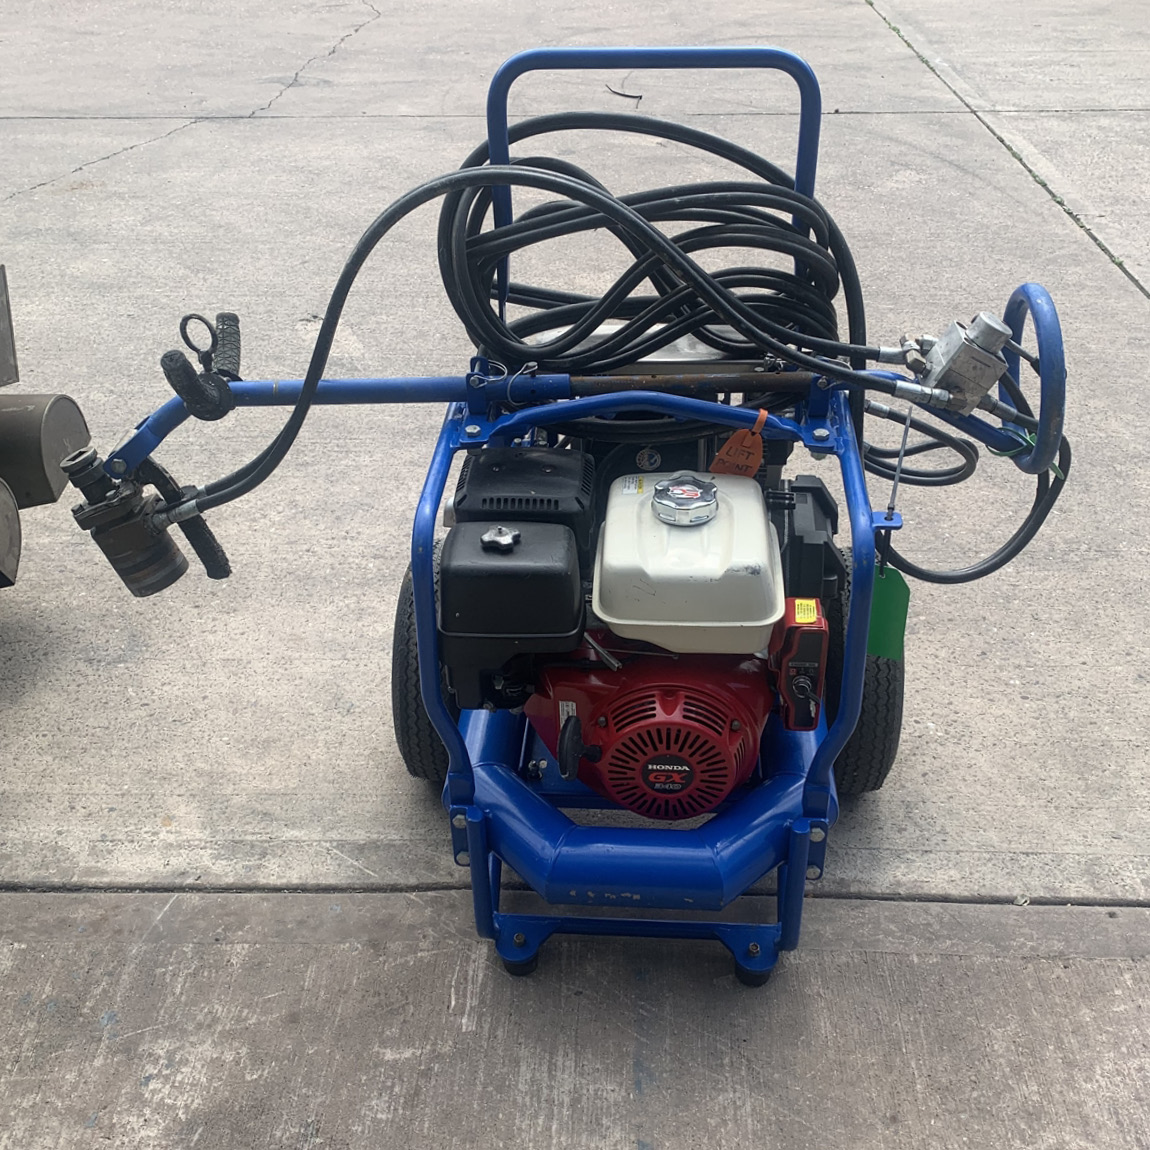 Speedcrete sell and hire out equipment used to level and finish concrete. This petrol powered Bunyan Striker is available to purchase as a used item.